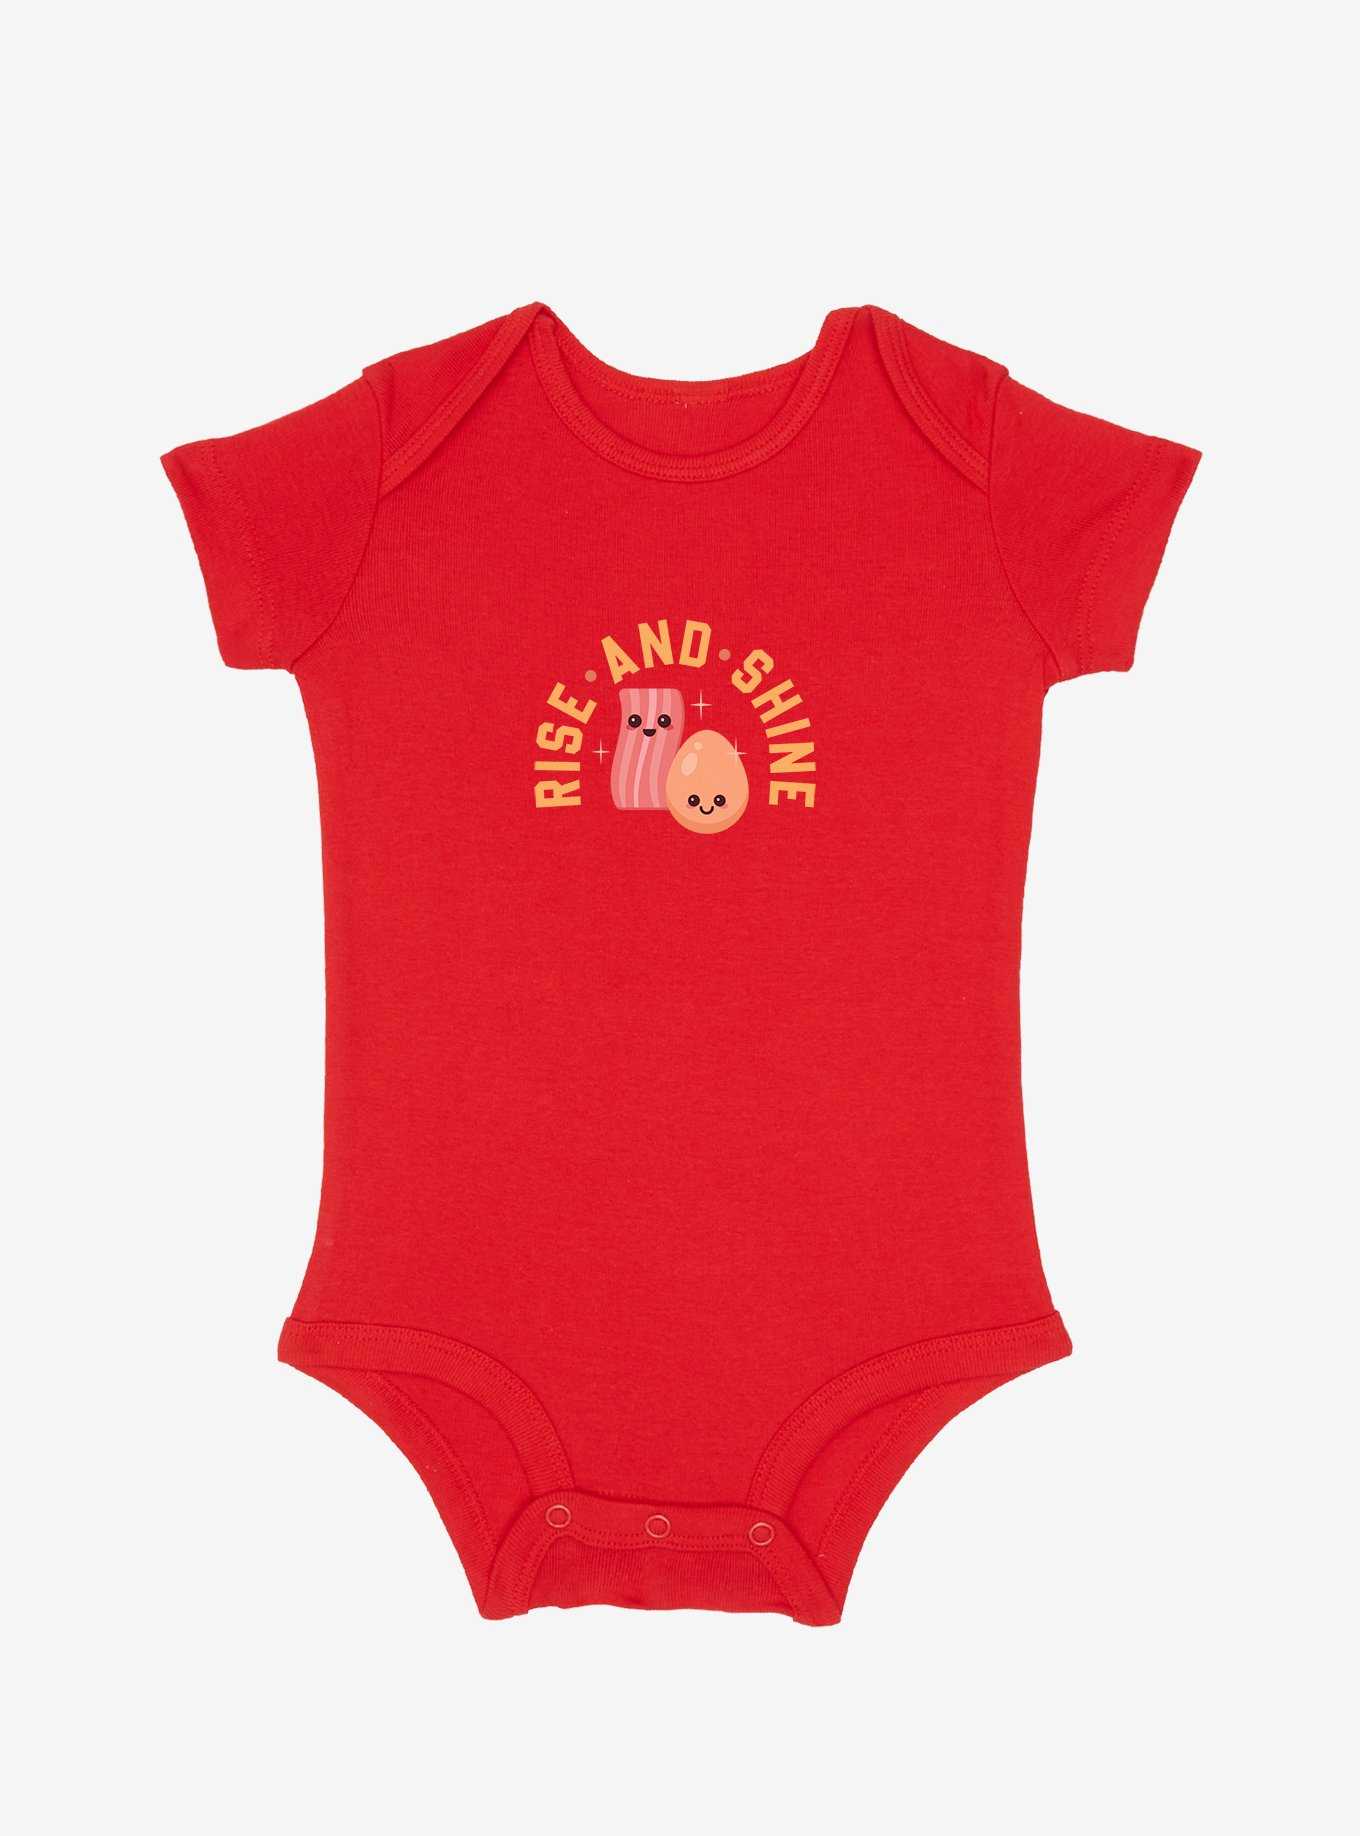 Mommy & Me Rise And Shine Infant Bodysuit, , hi-res